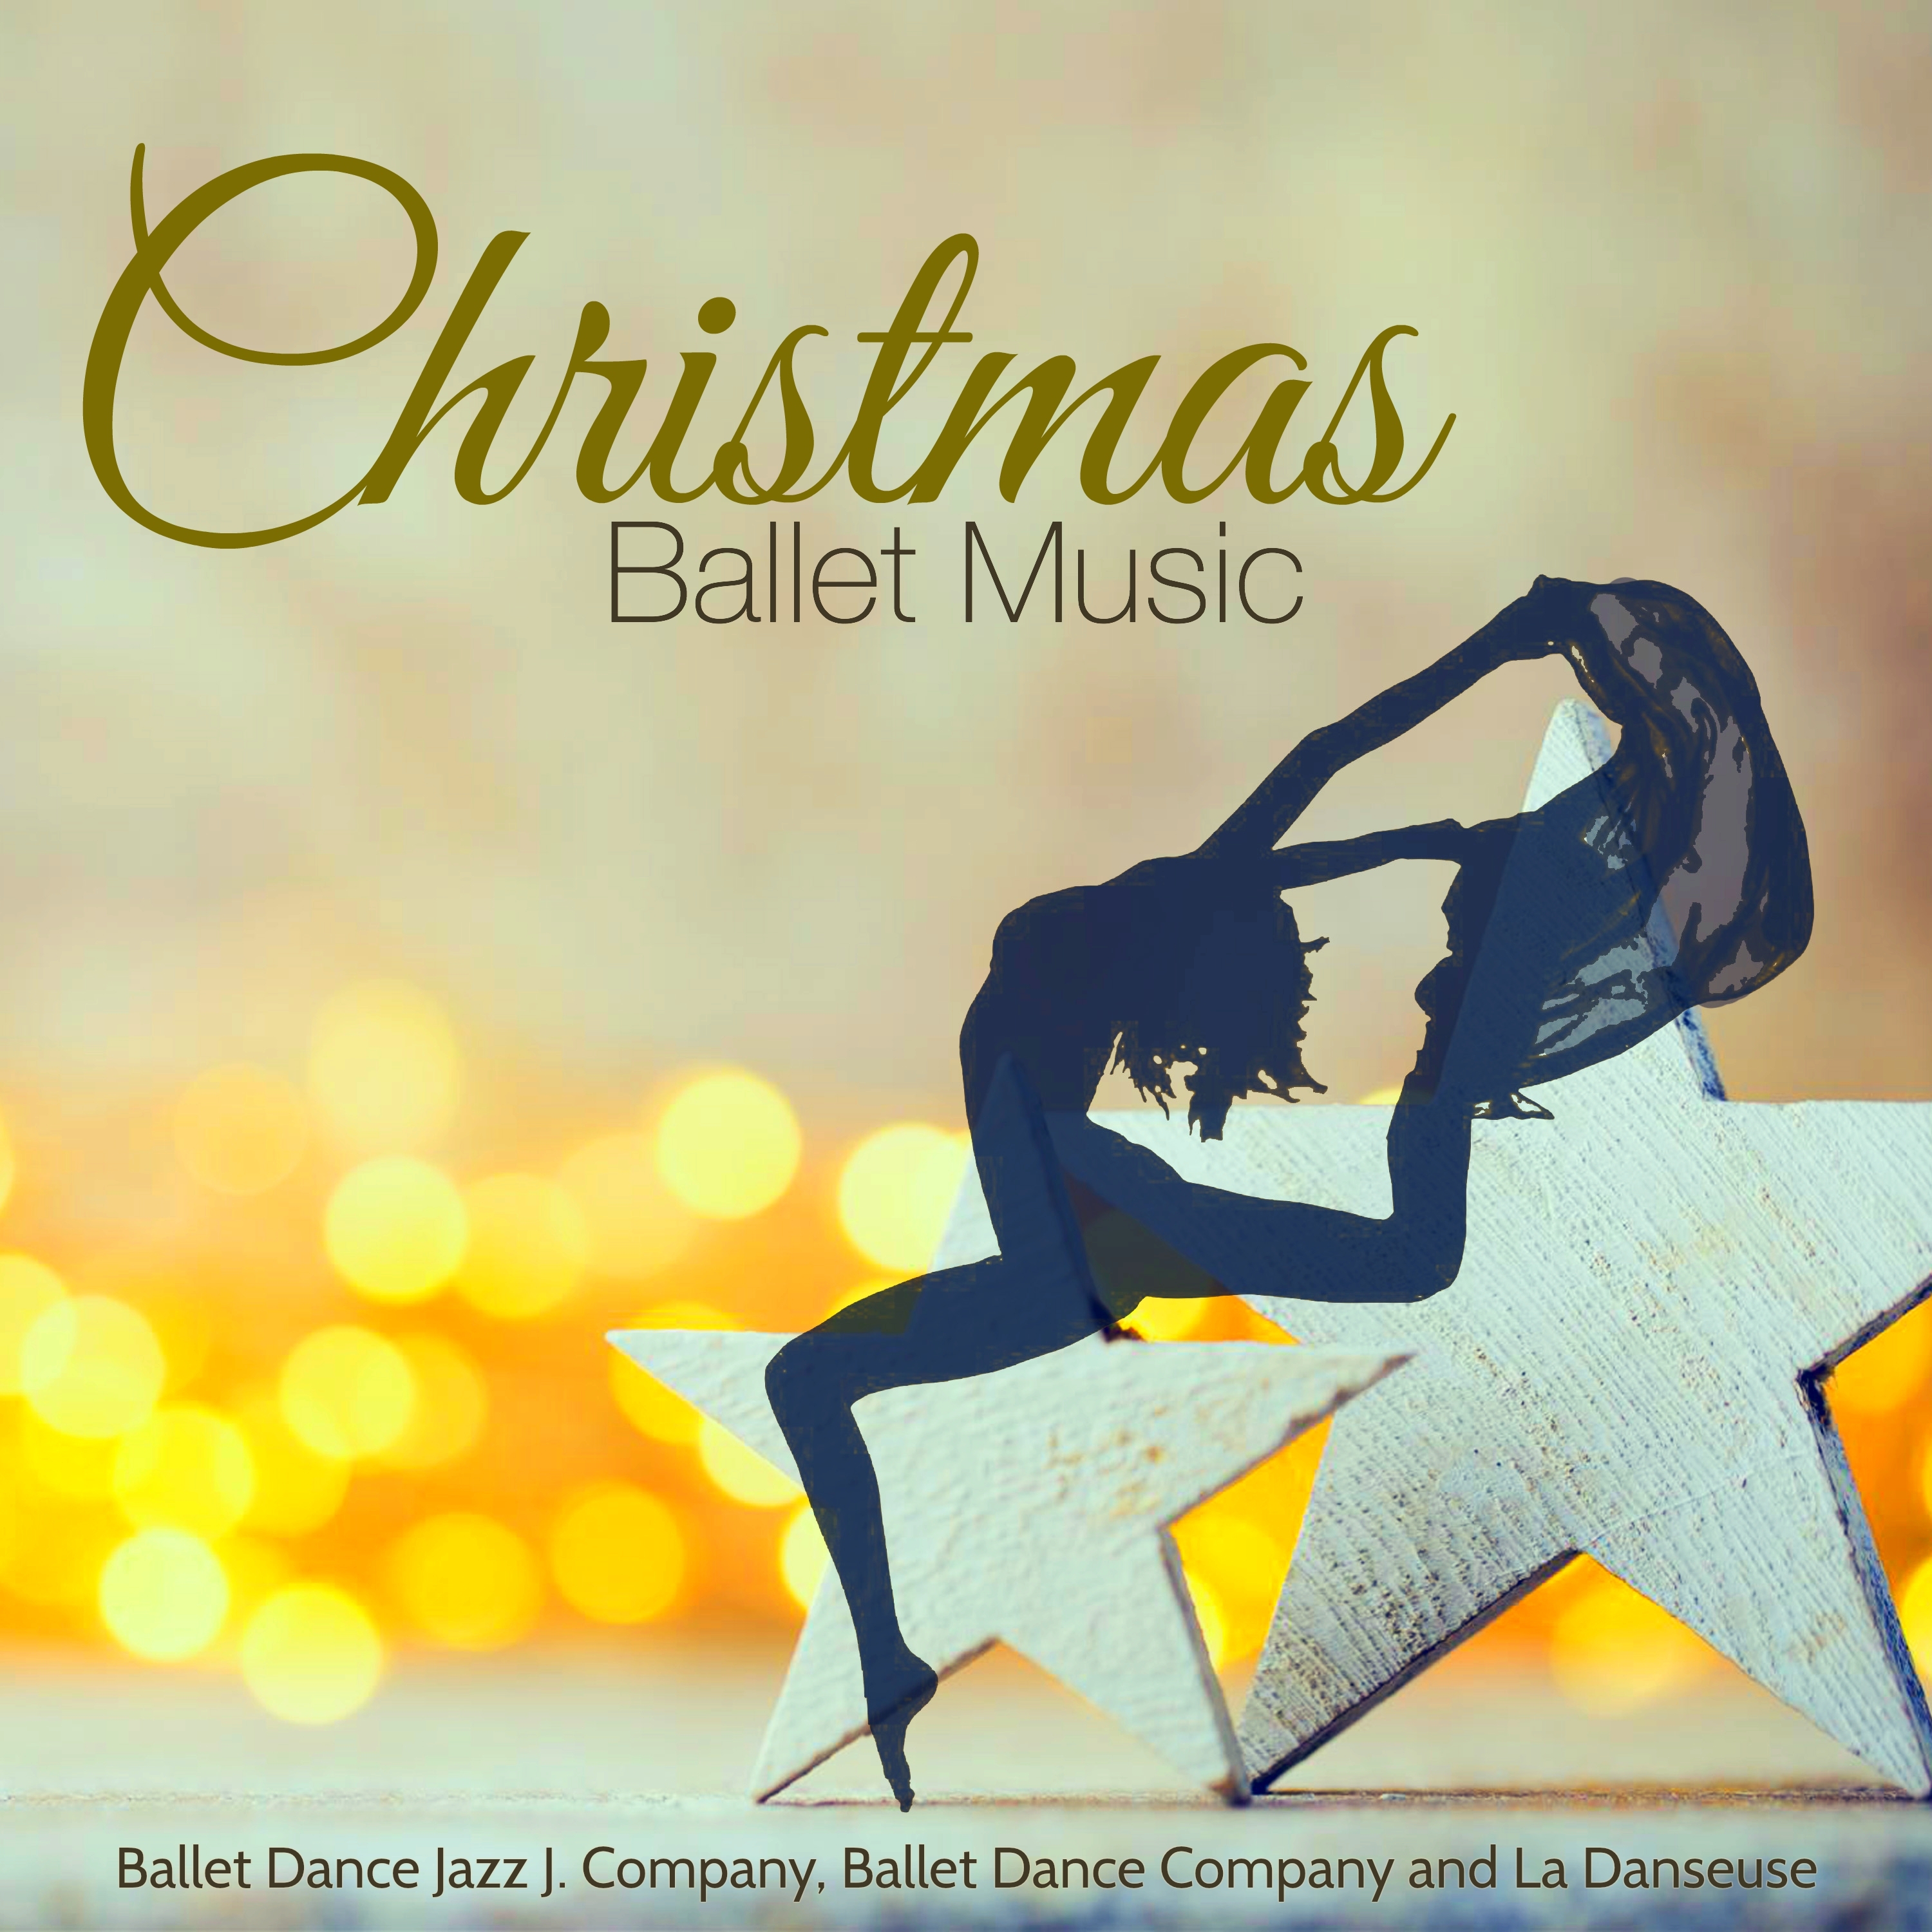 Christmas Ballet Music – Christmas Traditional, Orchestra and Piano Music for Ballet Class, Rehearsals and Choreography